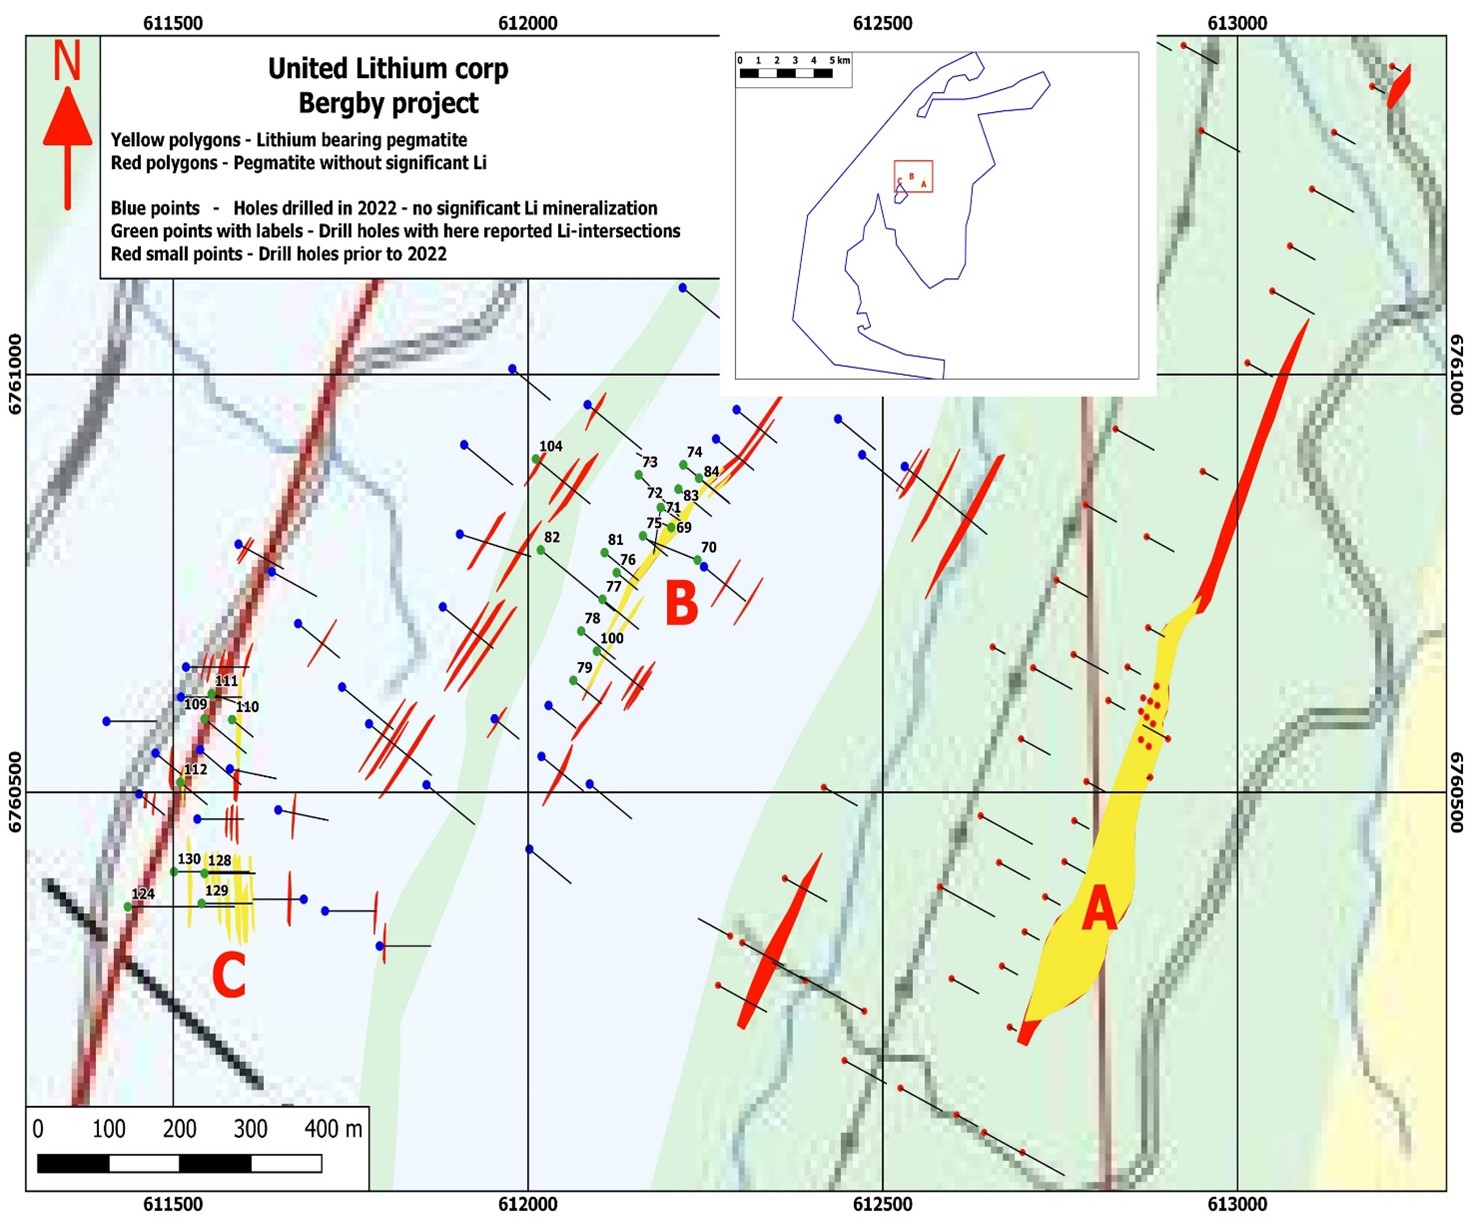 Geology Map showing the location of lithium bearing pegmatites A, B and C as well as drill holes and barren pegmatites.